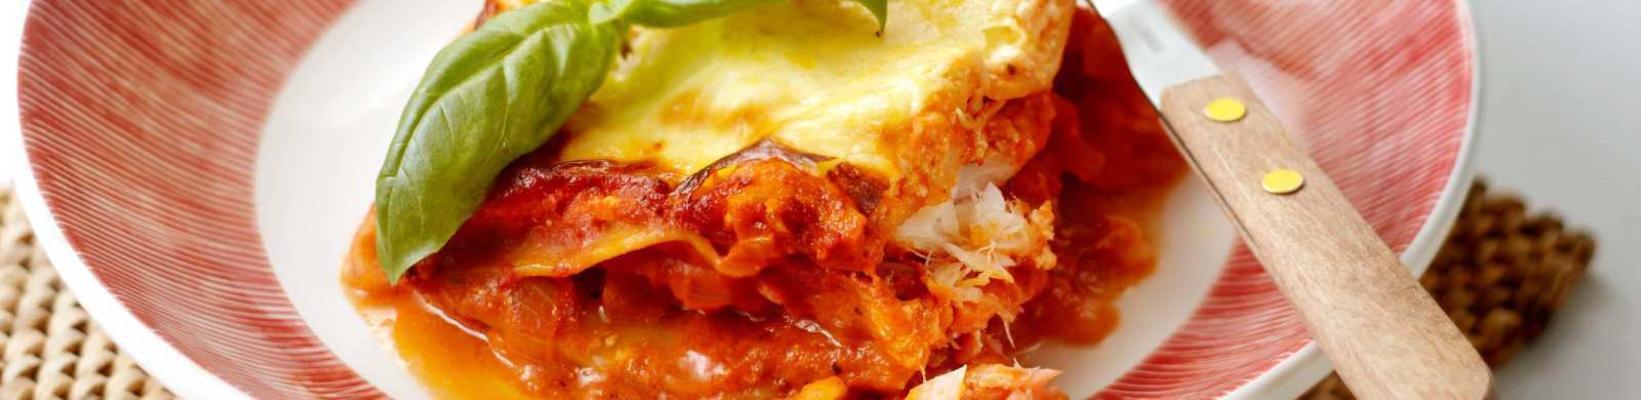 lasagna with smoked salmon and fish fillet